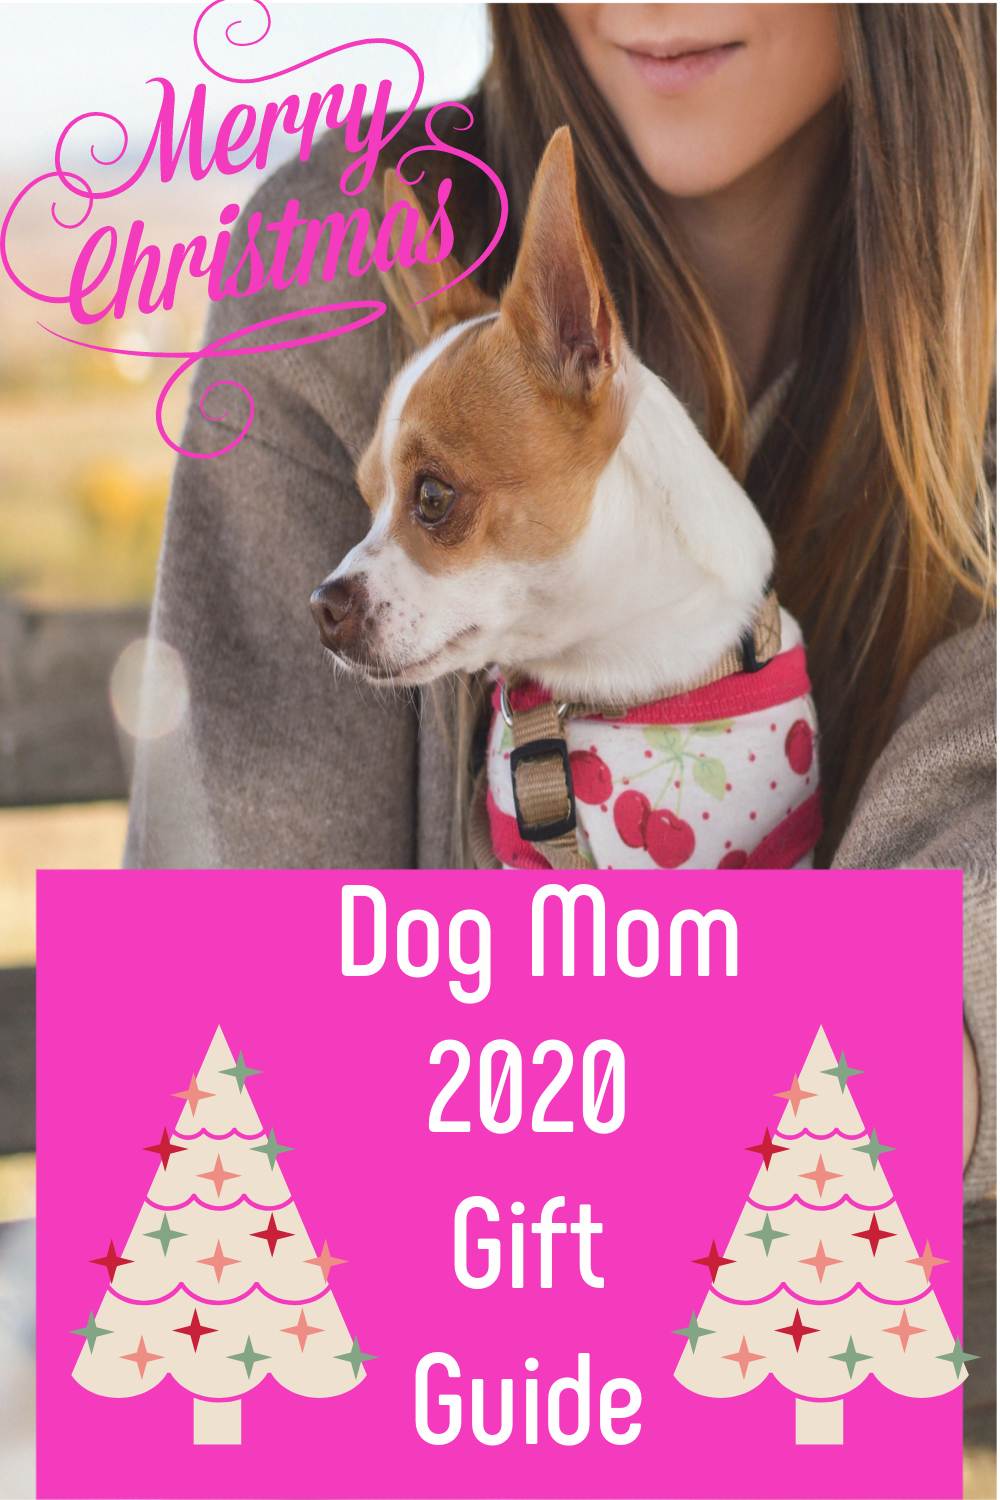 https://thepuppydogmomma.com/wp-content/uploads/2019/11/2020-Dog-Mom-Gift-Guide.png